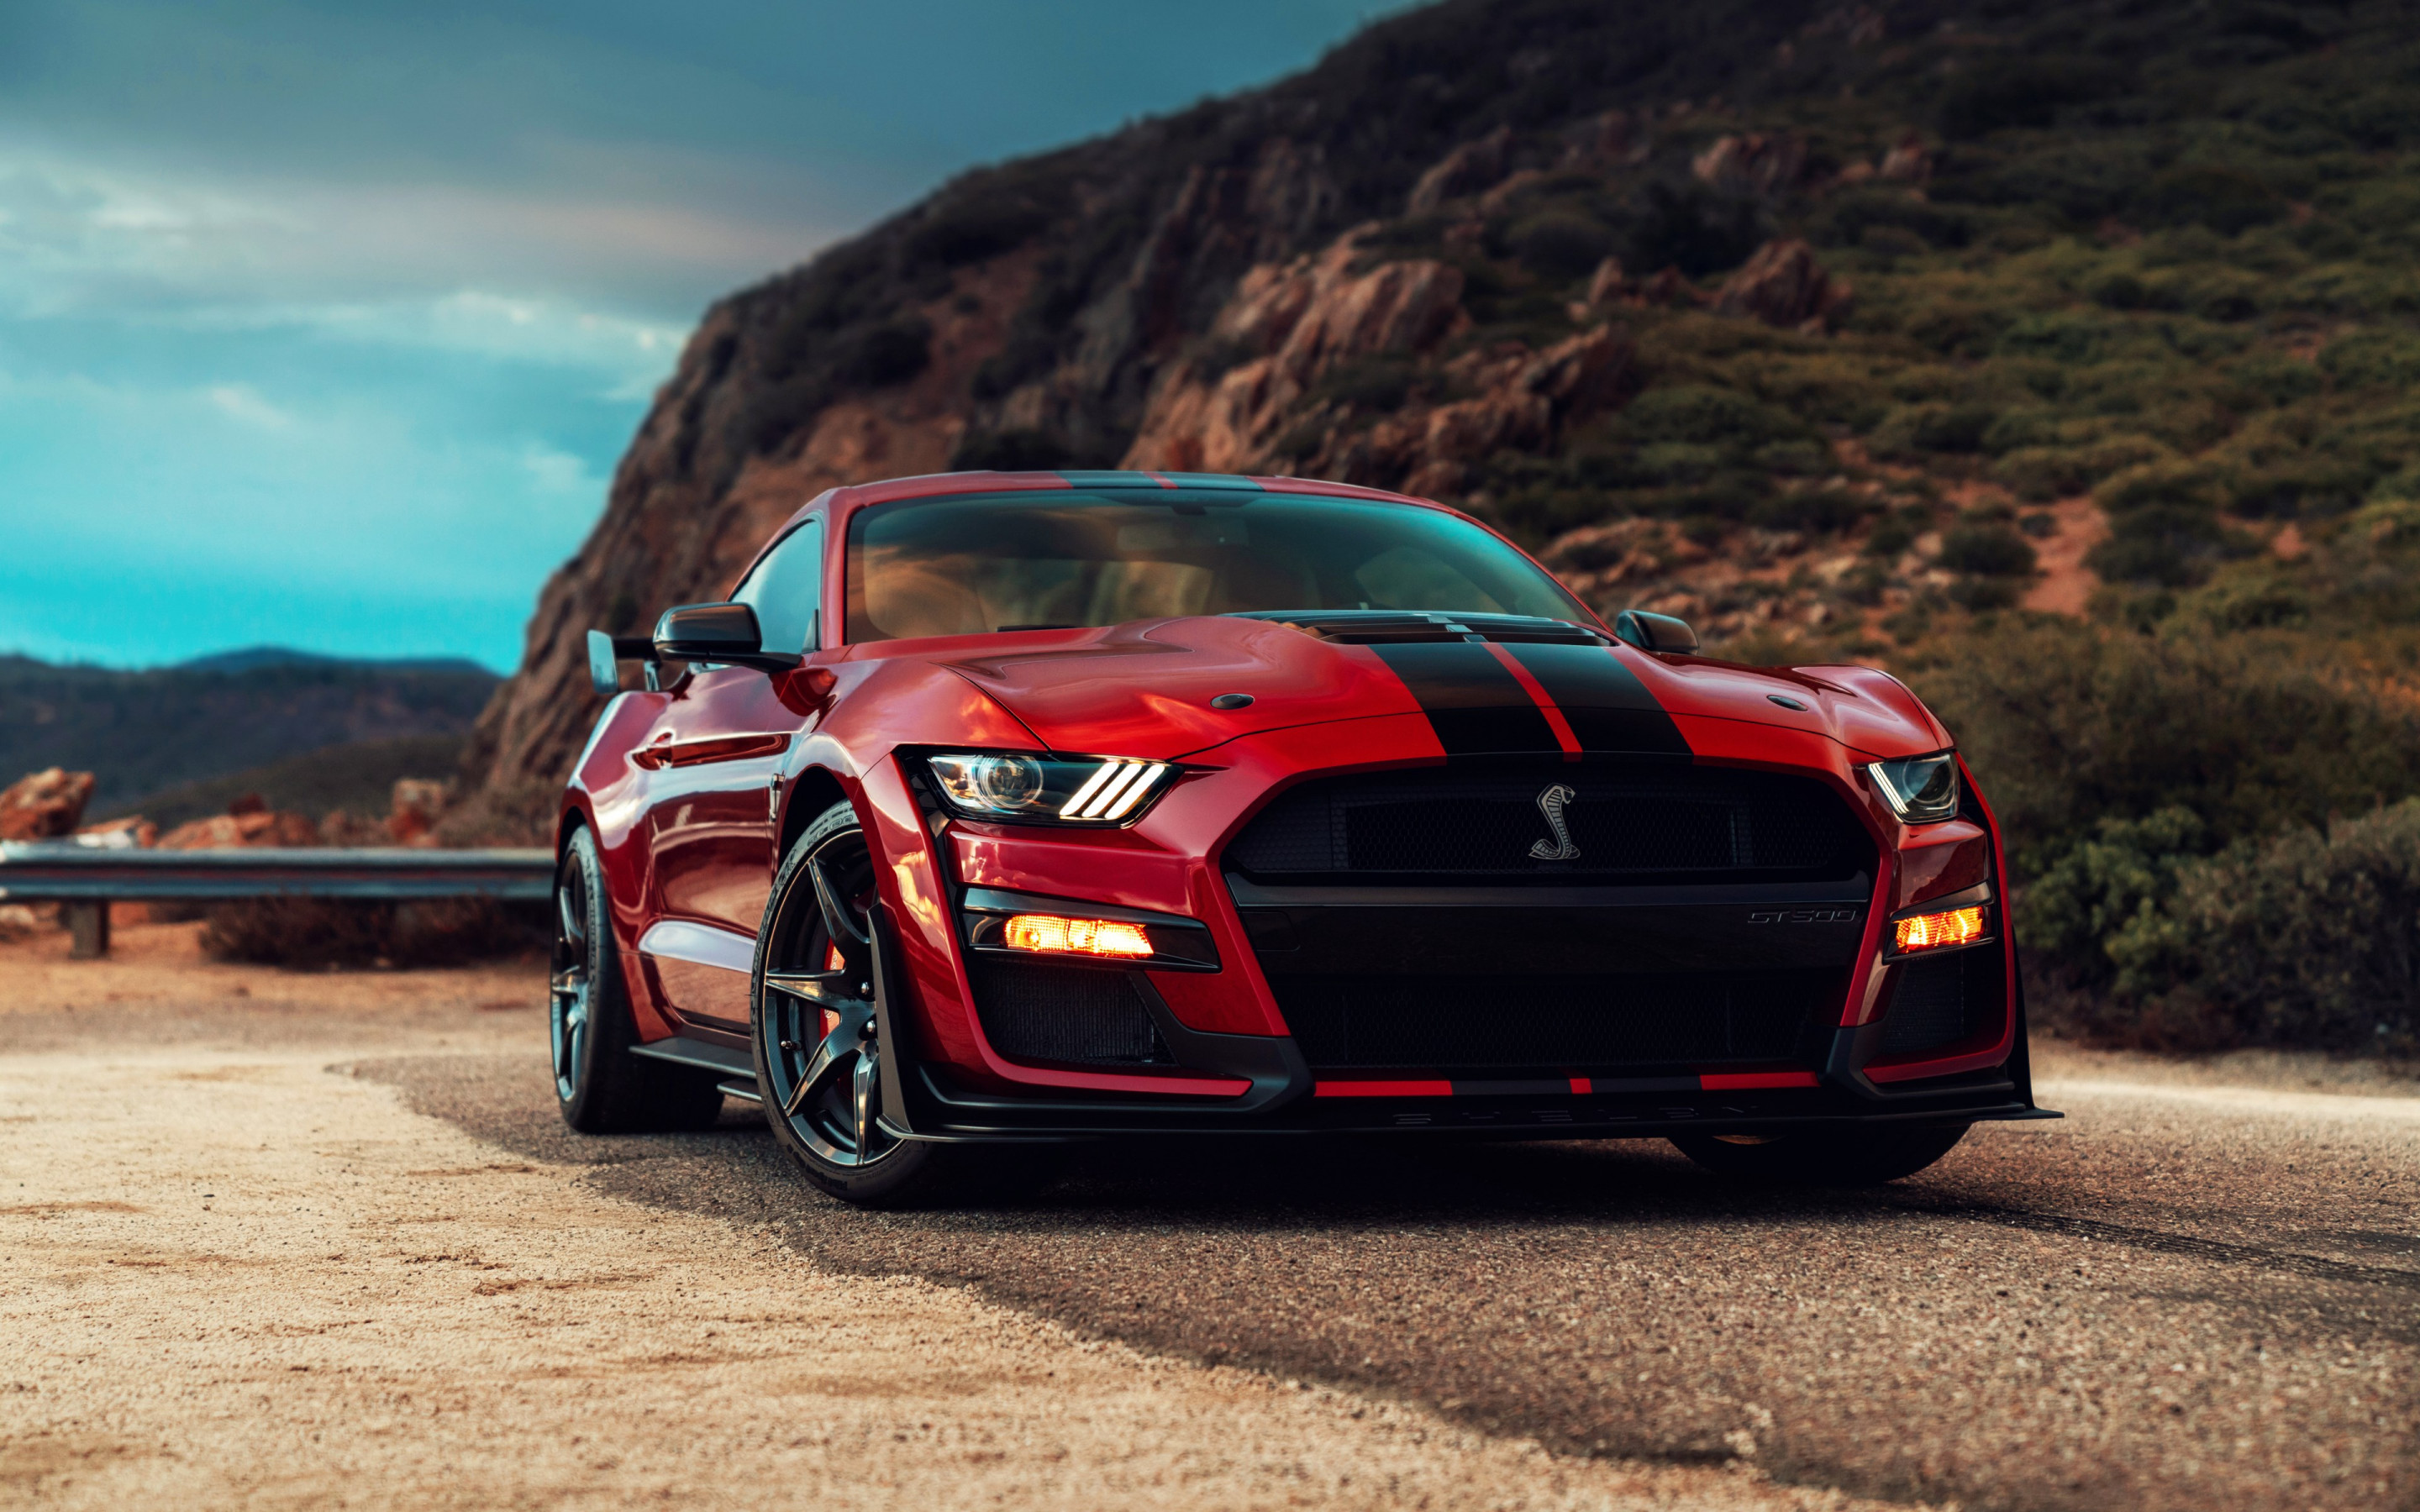 Ford Mustang Shelby GT500 wallpaper 2880x1800